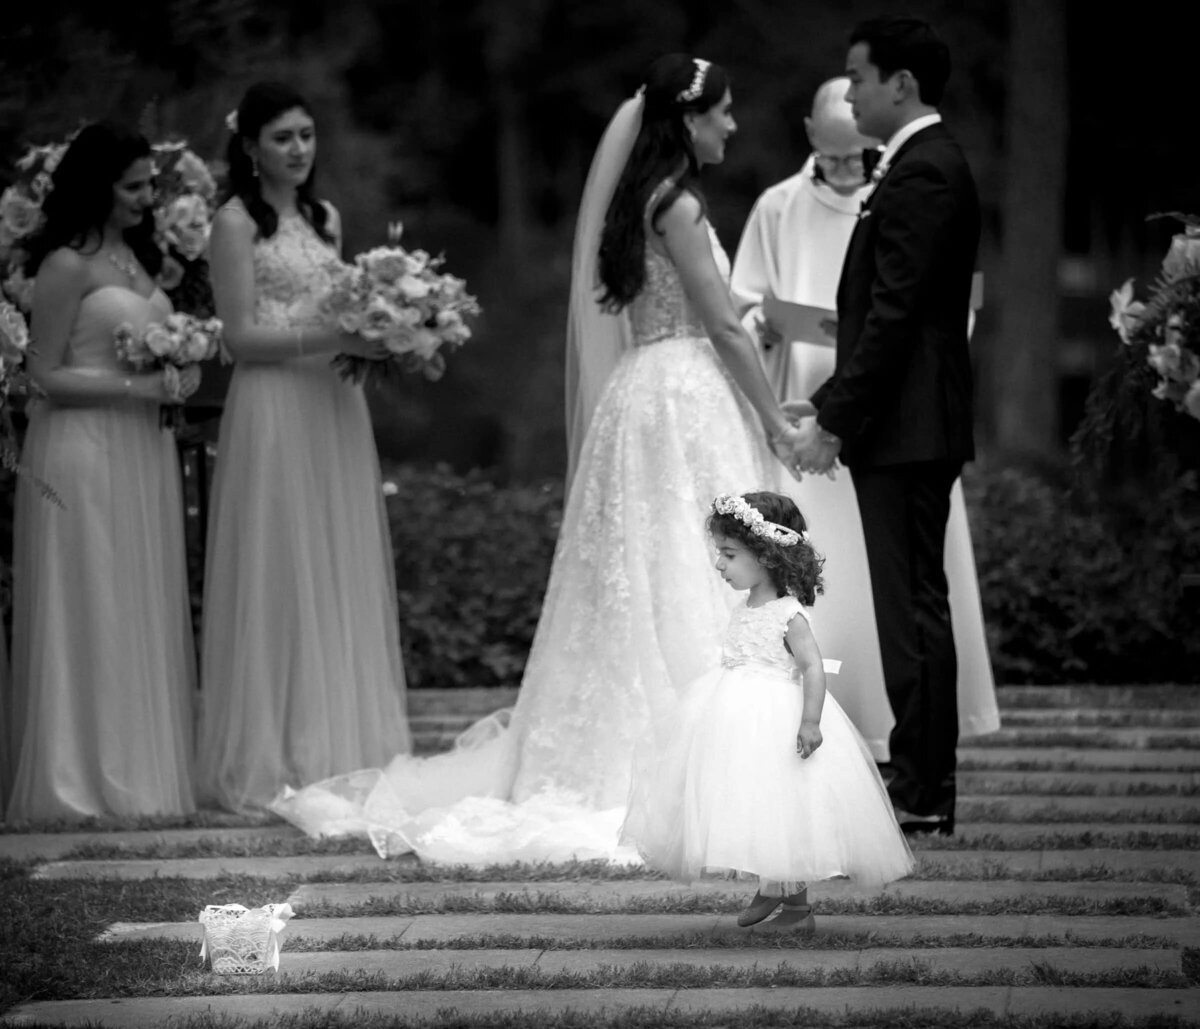 A flower girl in a fluffy dress looks up at the bride during a wedding ceremony, with the bridal party in the background in soft focus.